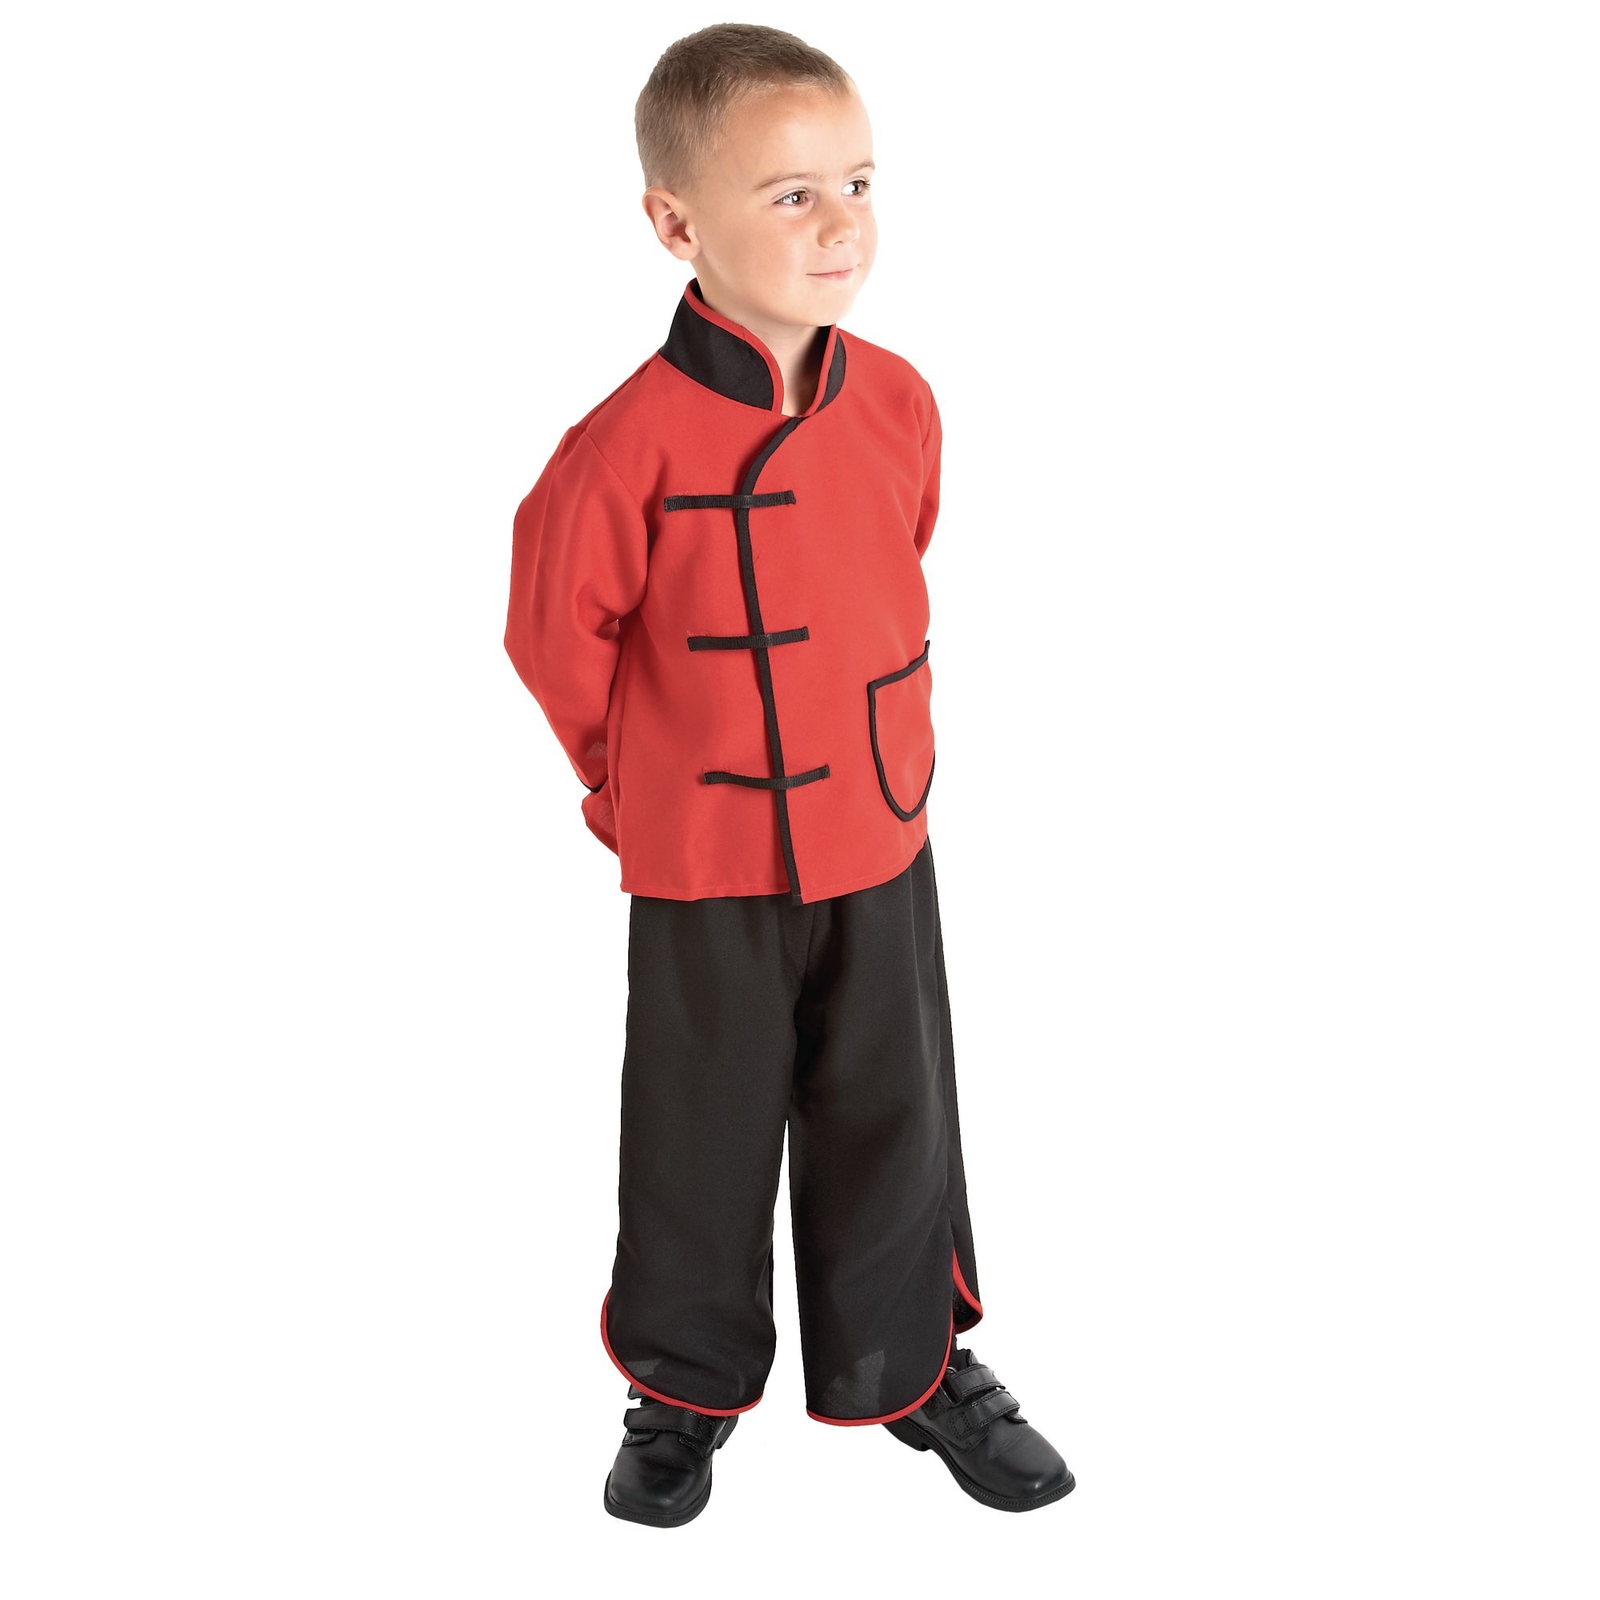 Multicultural Costumes - Chinese Boy - 3-5 Years